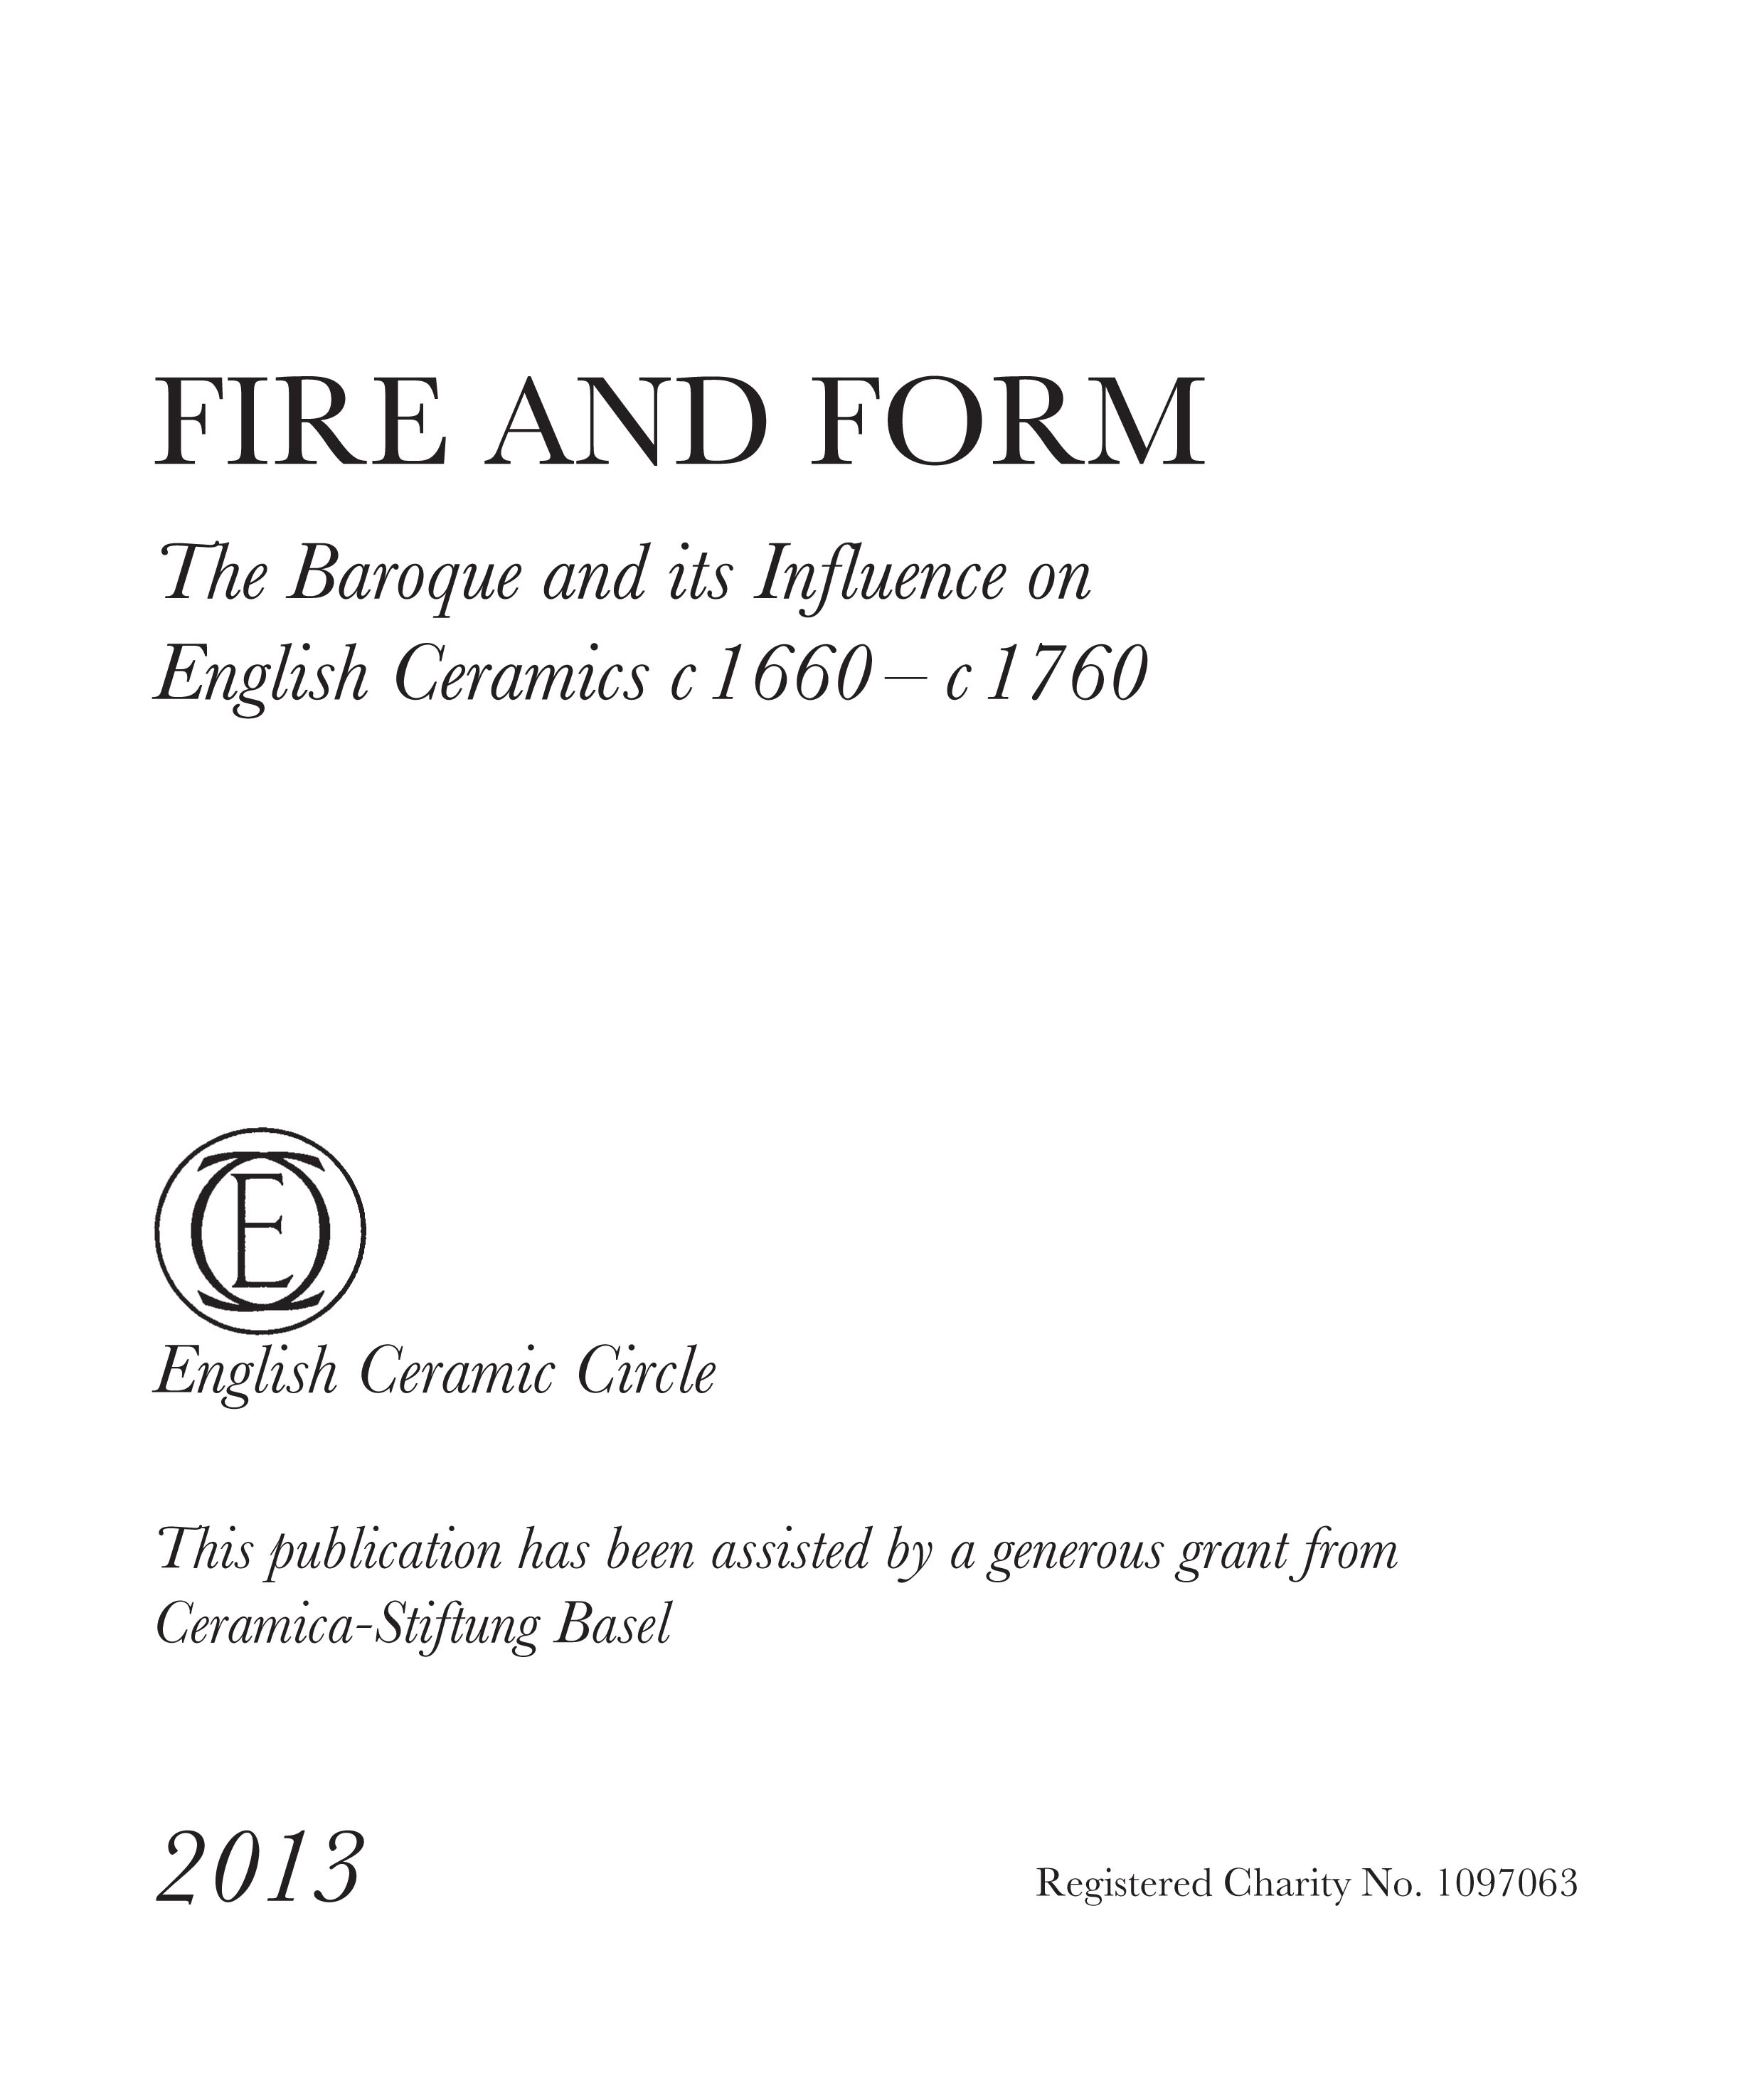 					View Fire and Form - The Baroque and its influence on British Ceramics 1660-1760
				